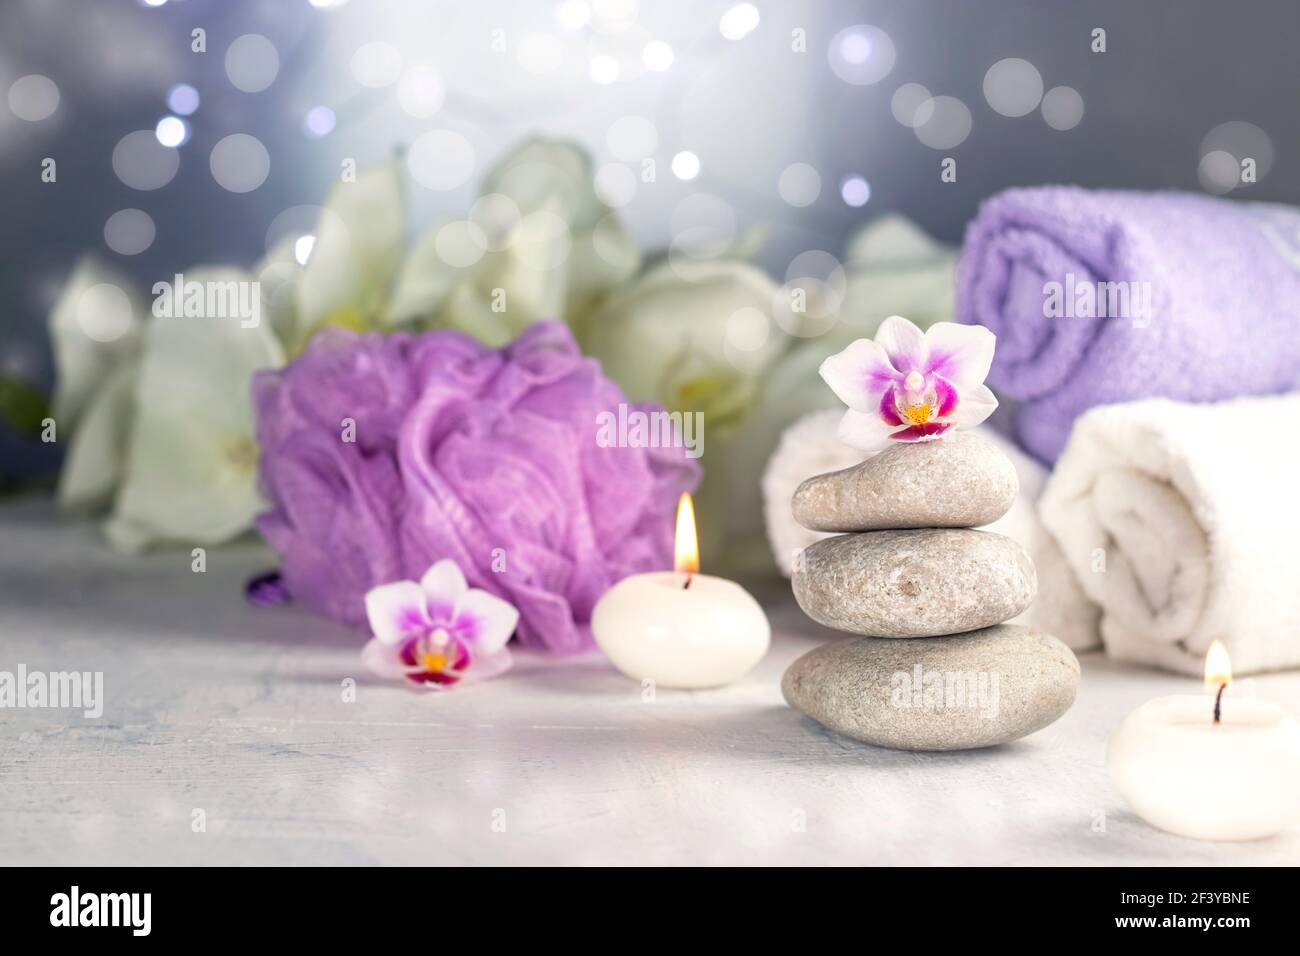 Massage Stones Burning Candles Rolled Towels Flowers Abstract Lights Spa Resort Therapy